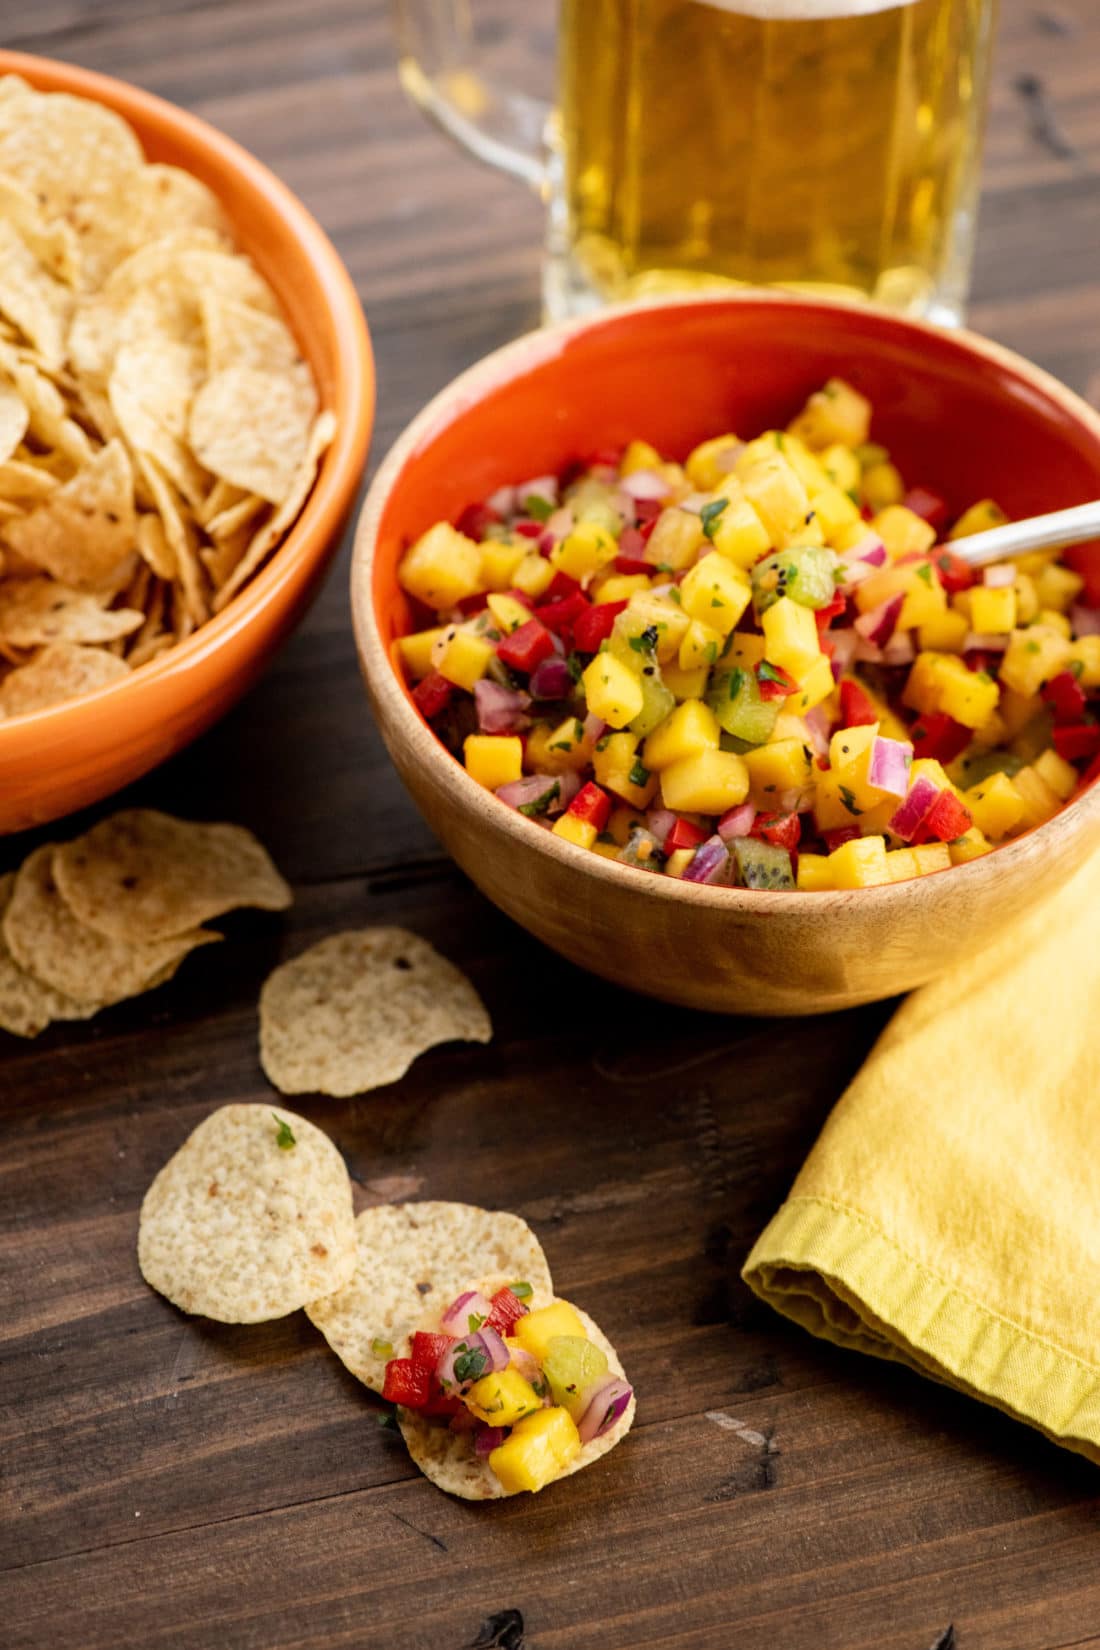 Bowls of chips and Tropical Fruit Salsa.